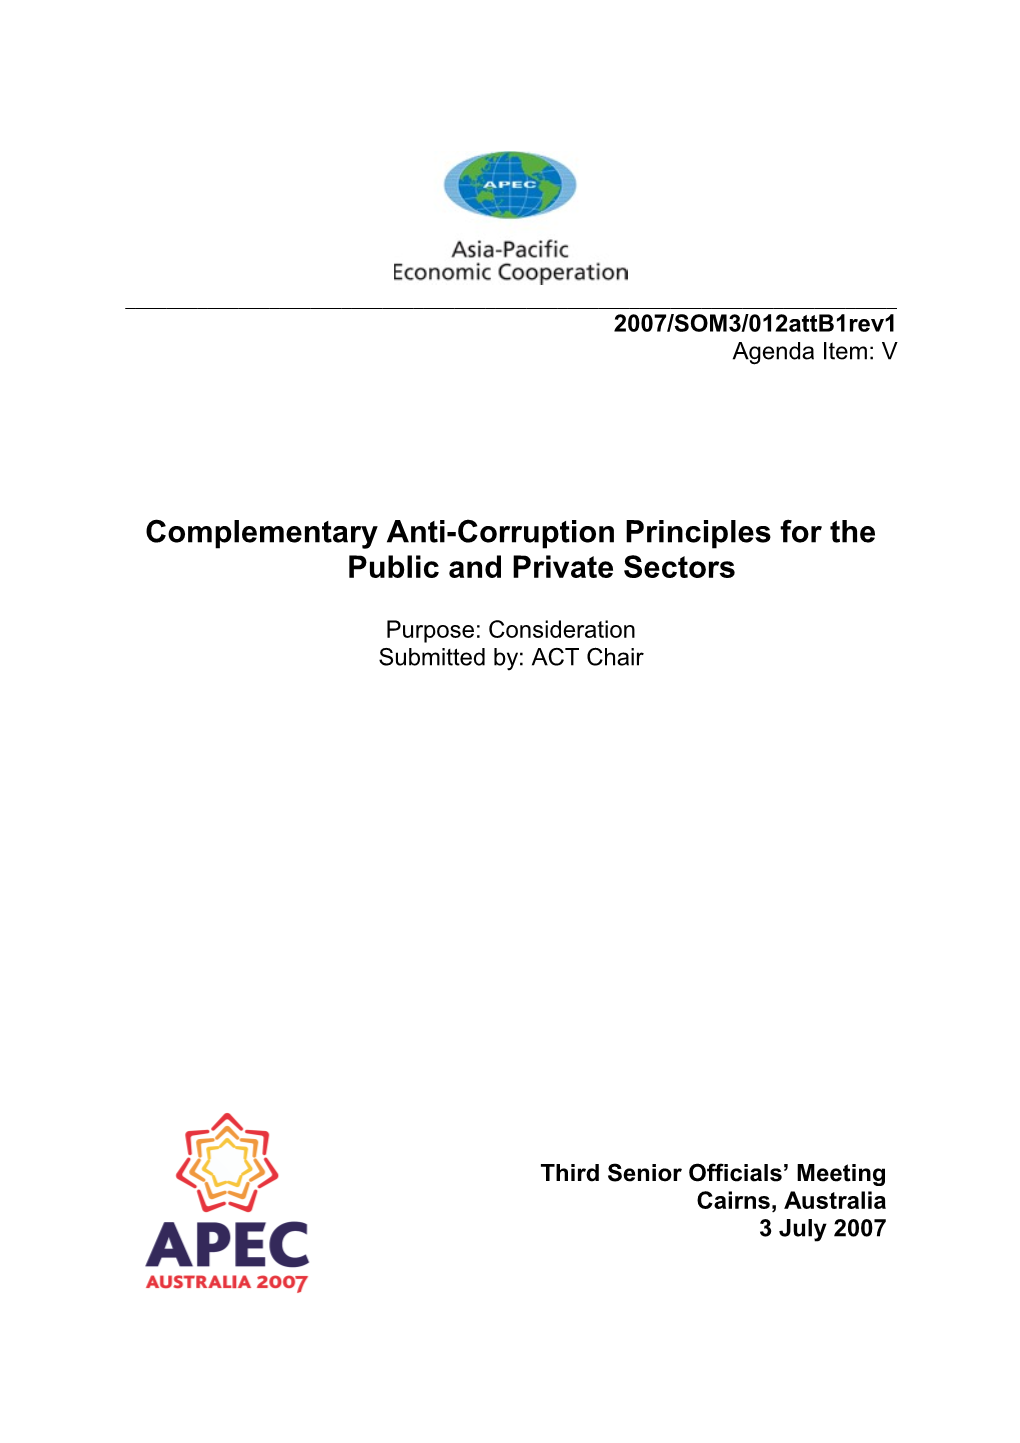 Complementary Anti-Corruption Principles